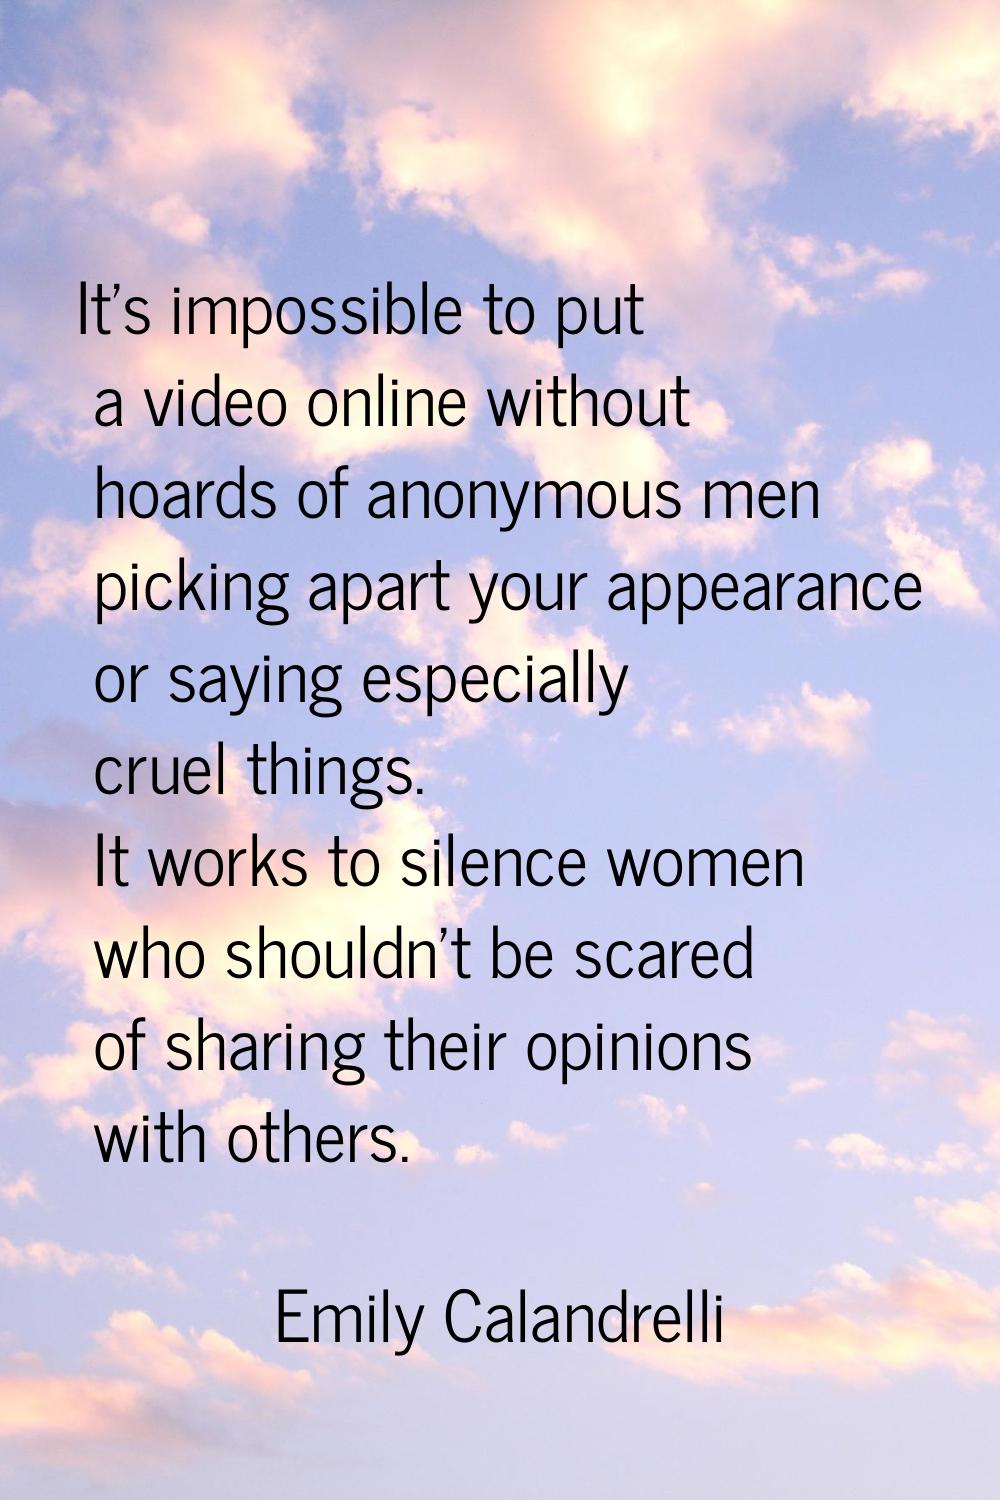 It's impossible to put a video online without hoards of anonymous men picking apart your appearance